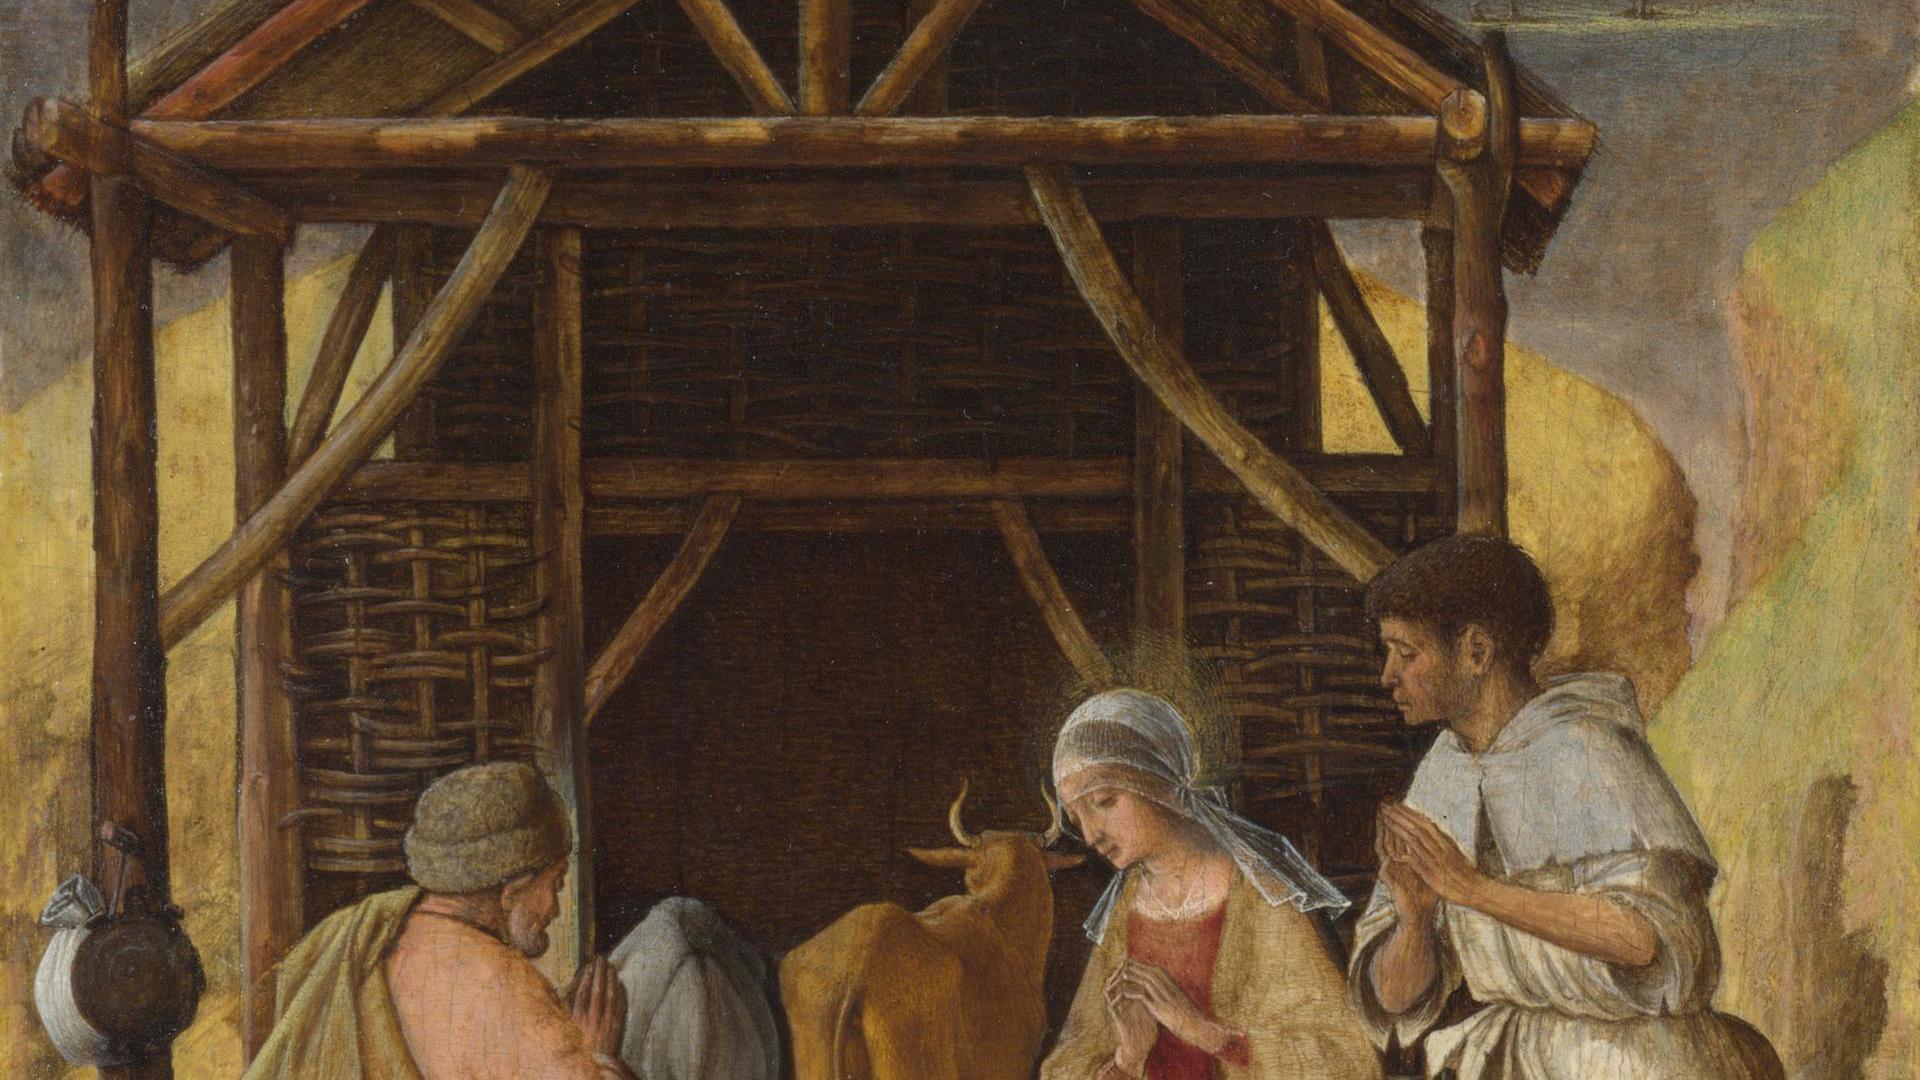 The Adoration of the Shepherds by Ercole de' Roberti